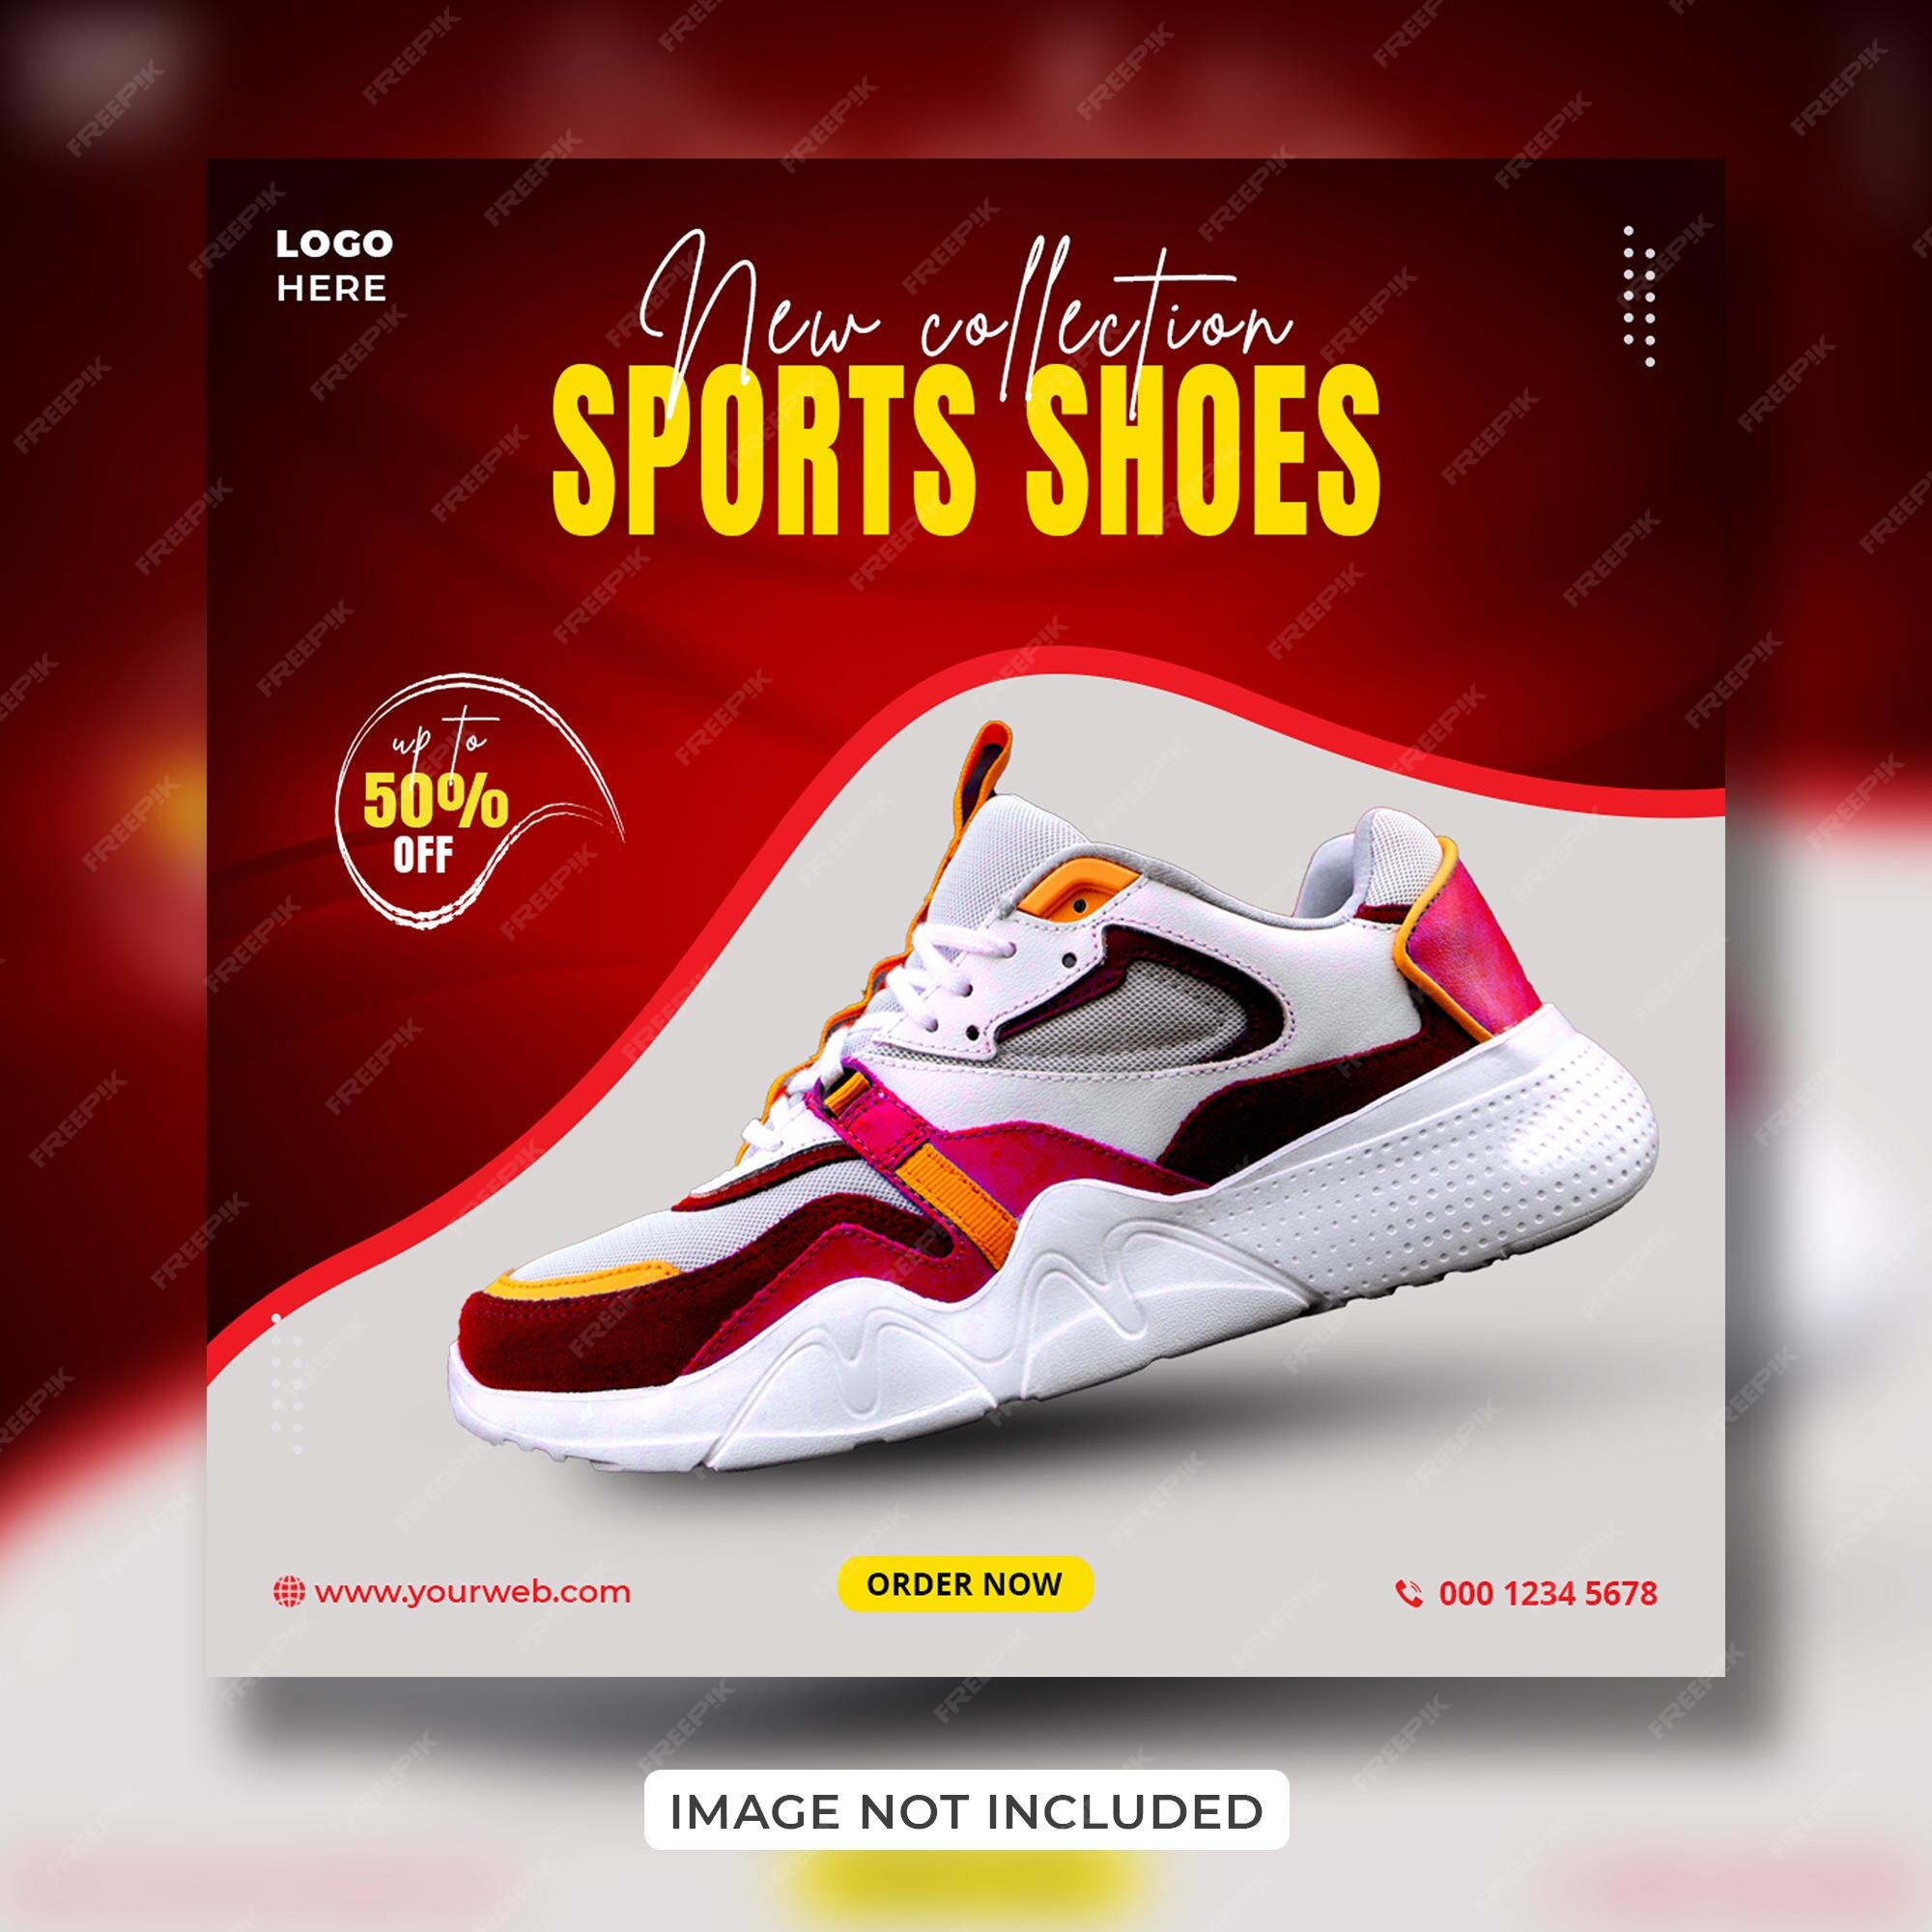 Premium PSD | Exclusive sports shoes collection creative social media  banner design or square flyer